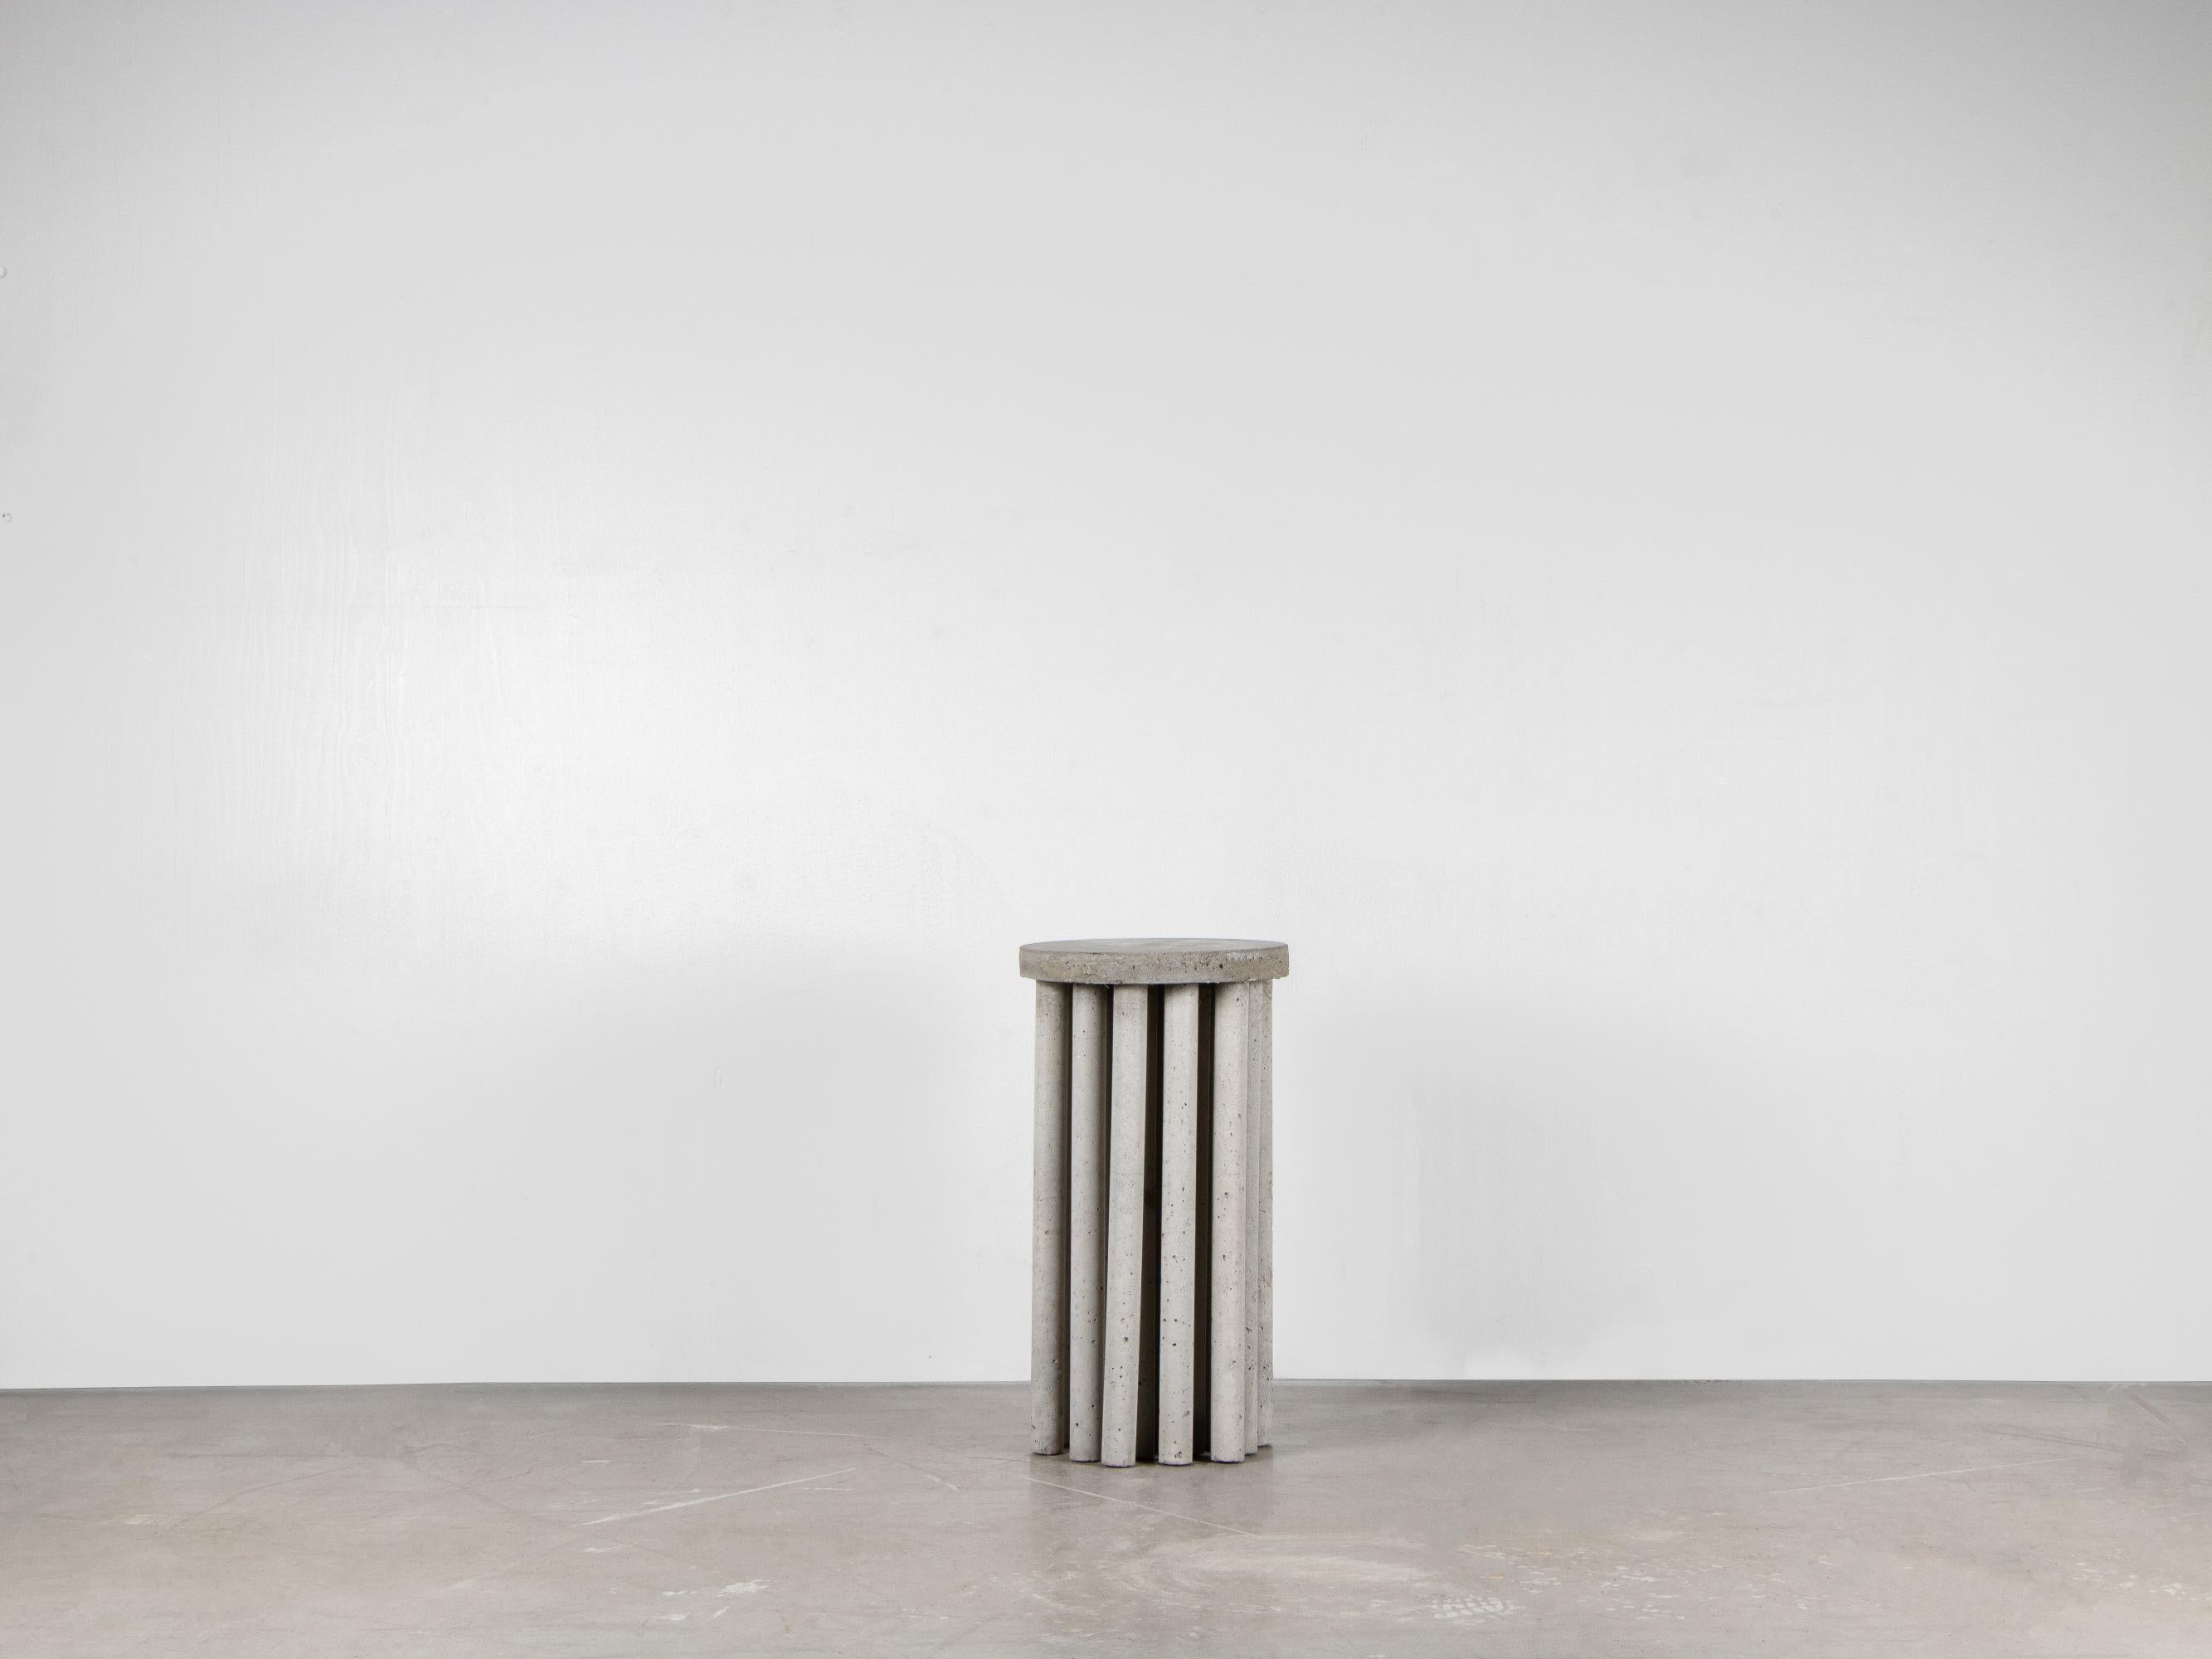 PÅLE Sculpted side table by Lucas Tyra Morten
2018
Limited edition of 23
Dimensions: Ø 30, H 56 cm
Material: Sculpted in raw concrete

With elements fetched by the architectural era brutalism combined with a figurative memory of a group of